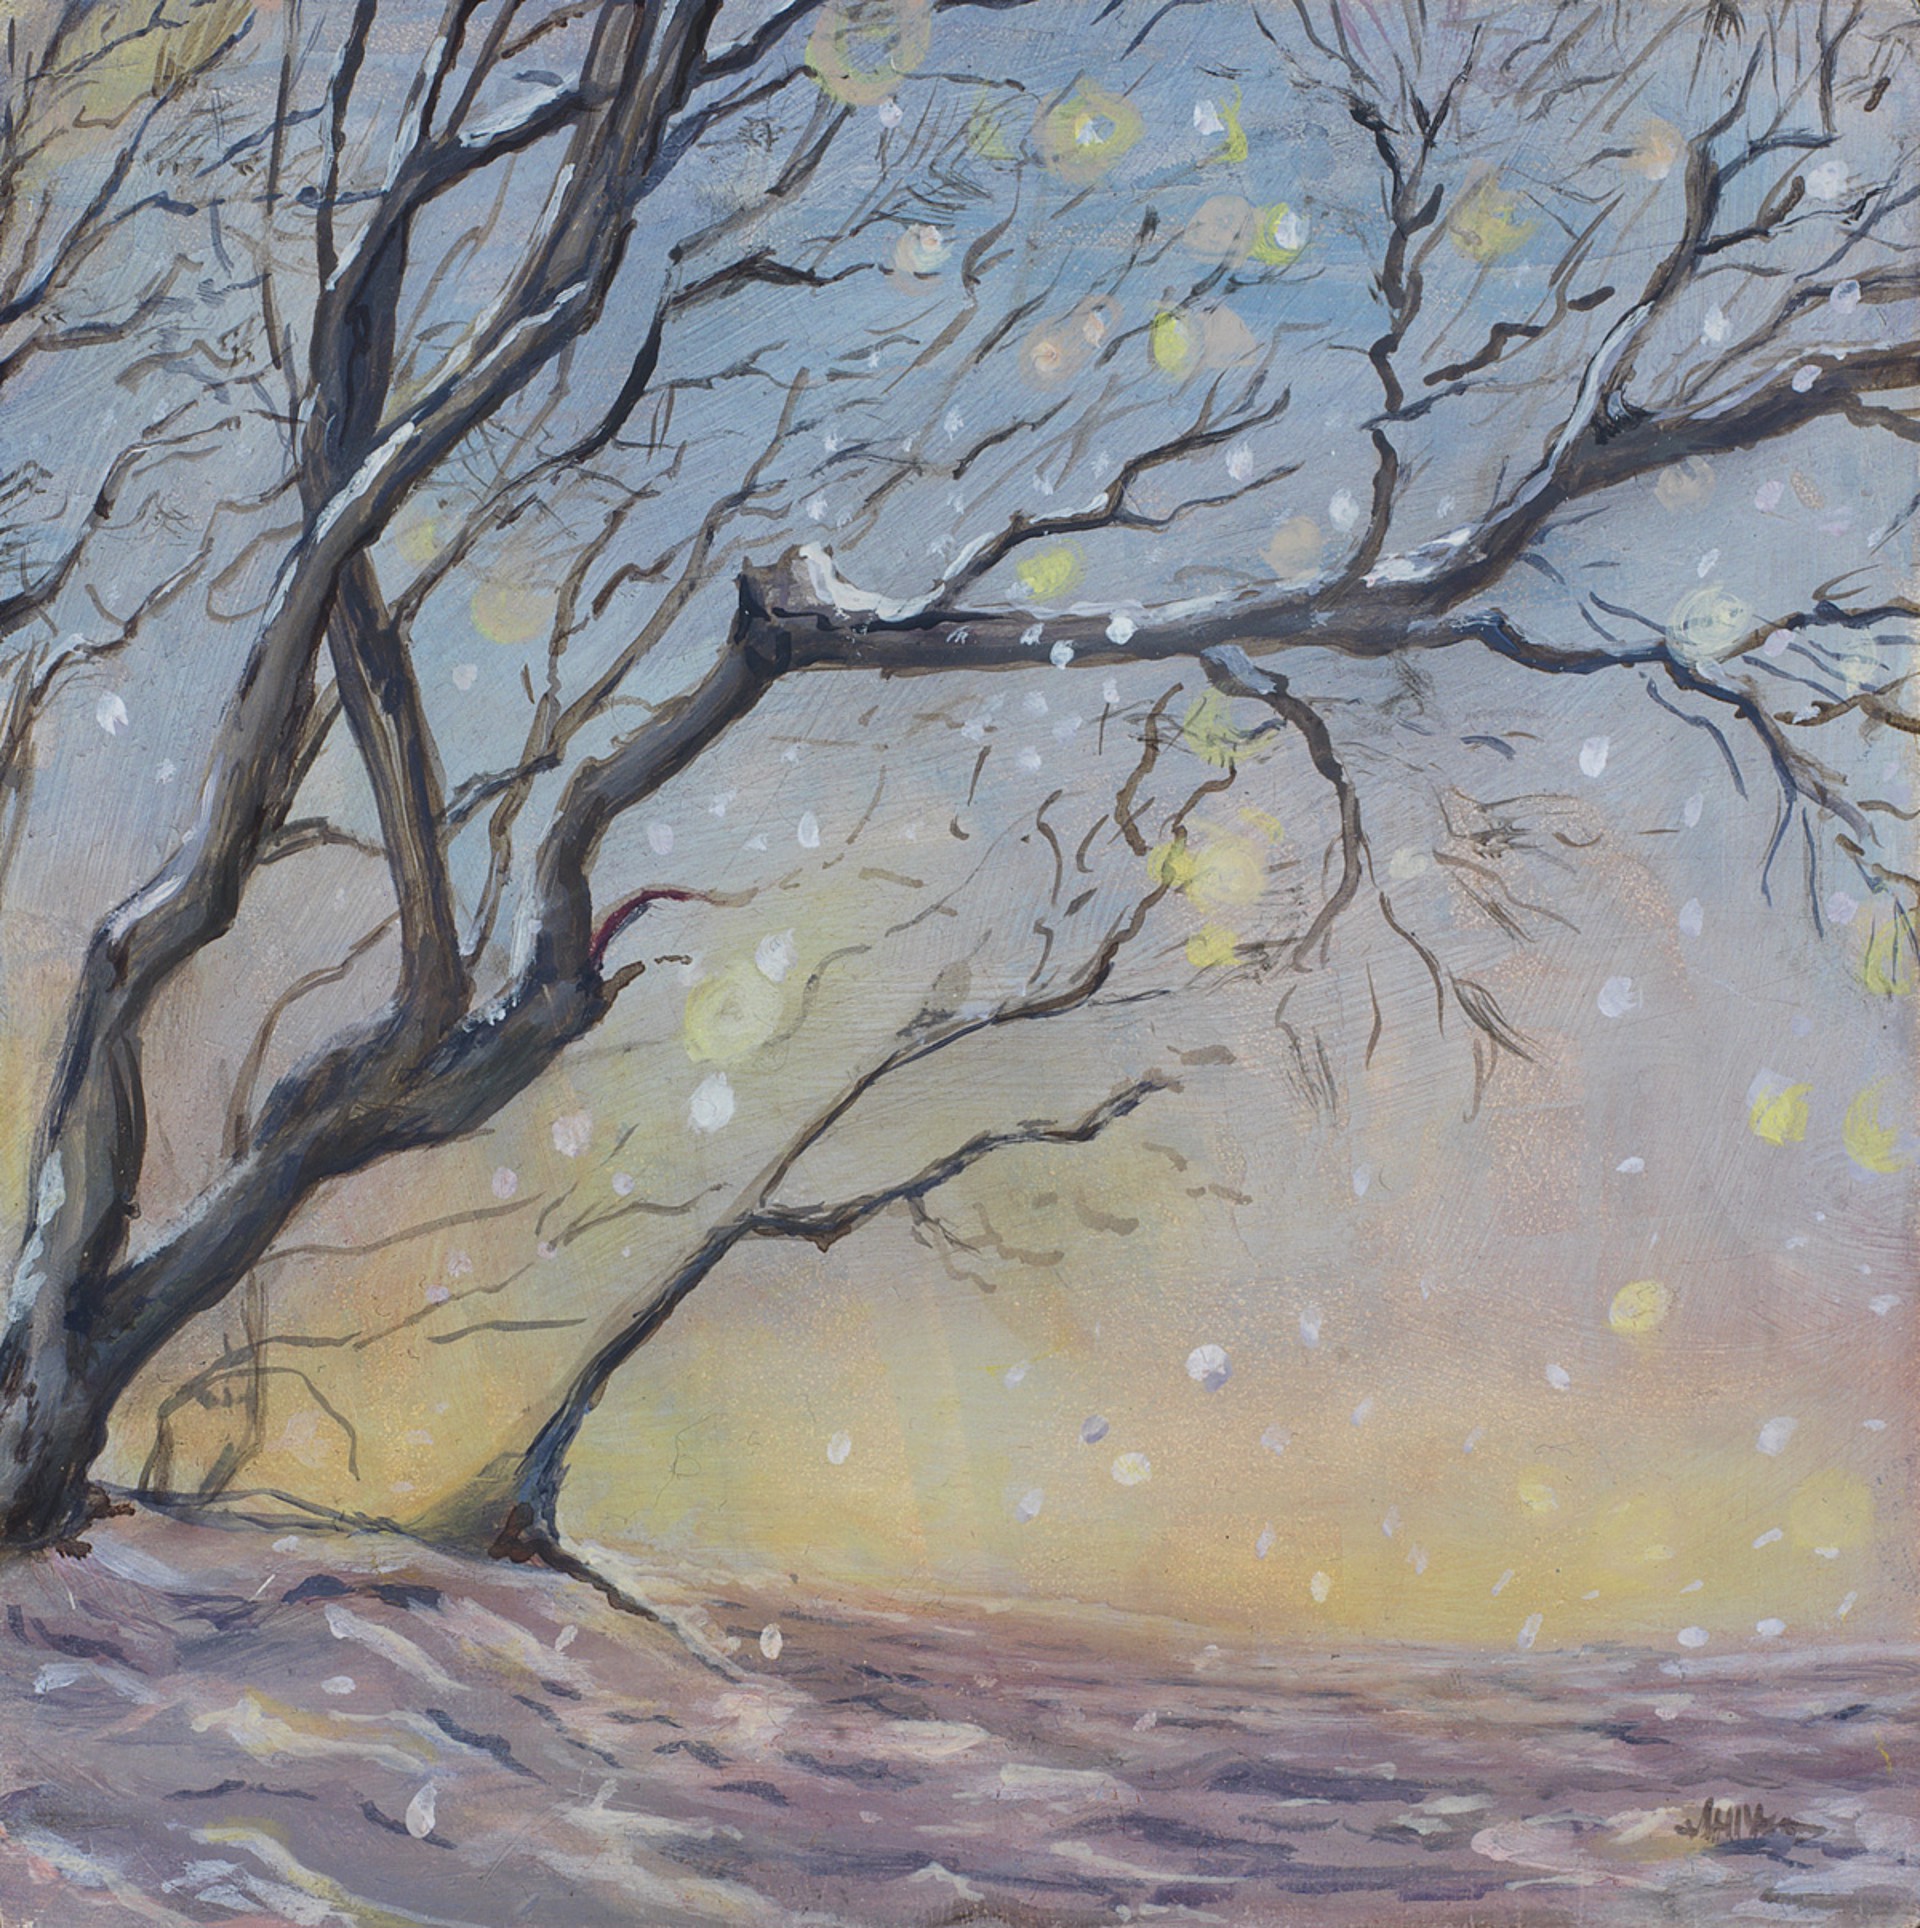 Winter Light by Sarah Means